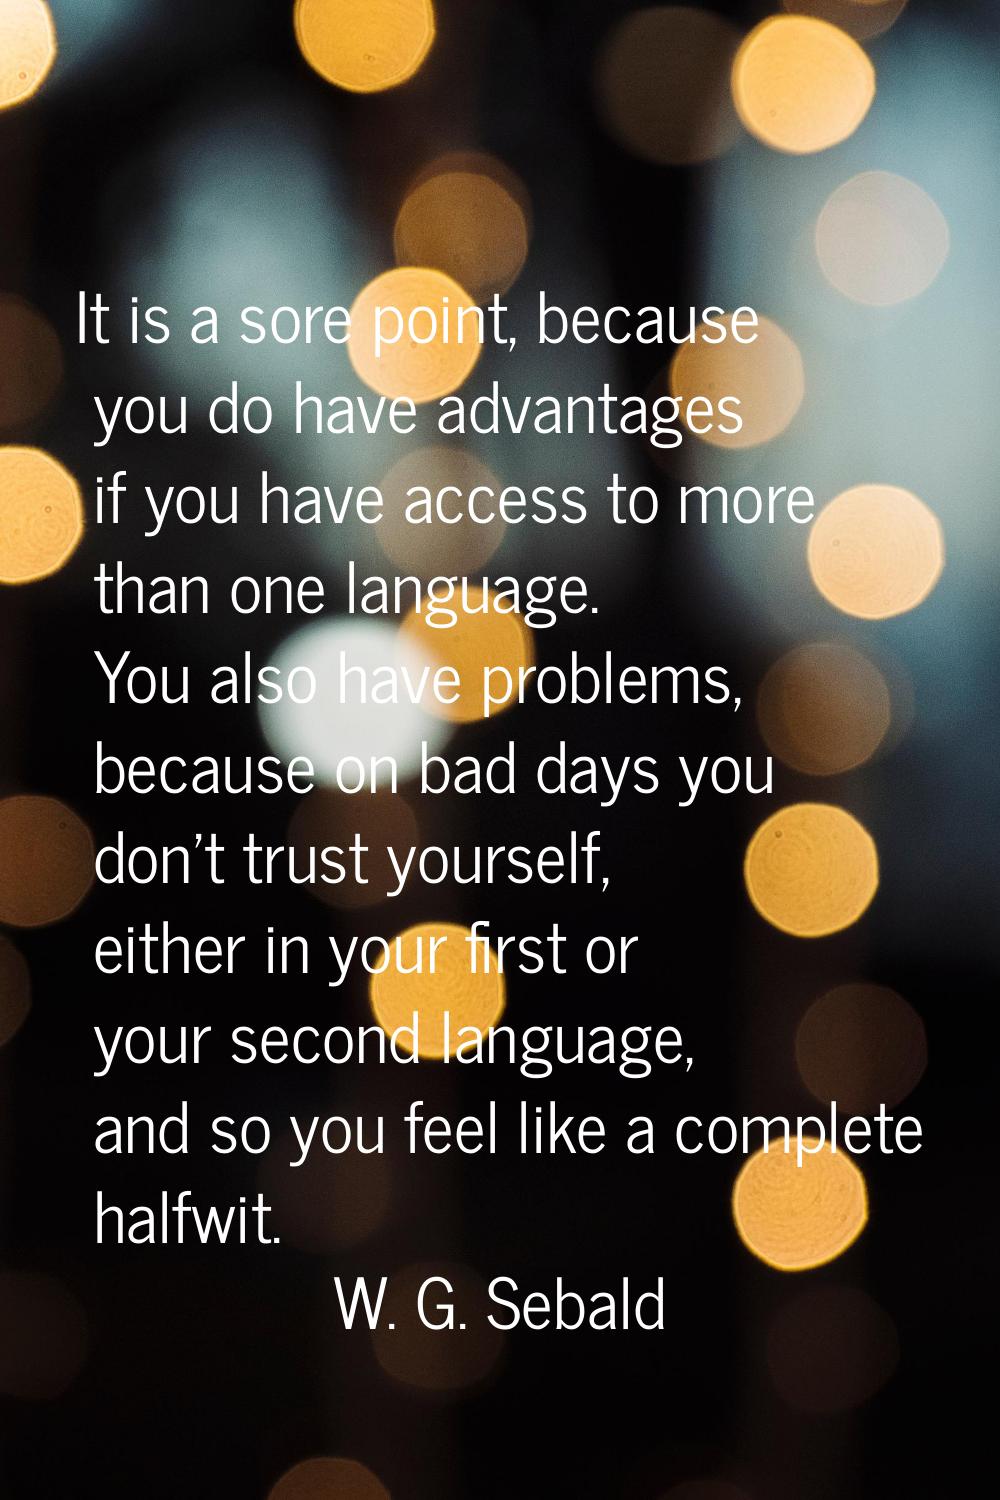 It is a sore point, because you do have advantages if you have access to more than one language. Yo